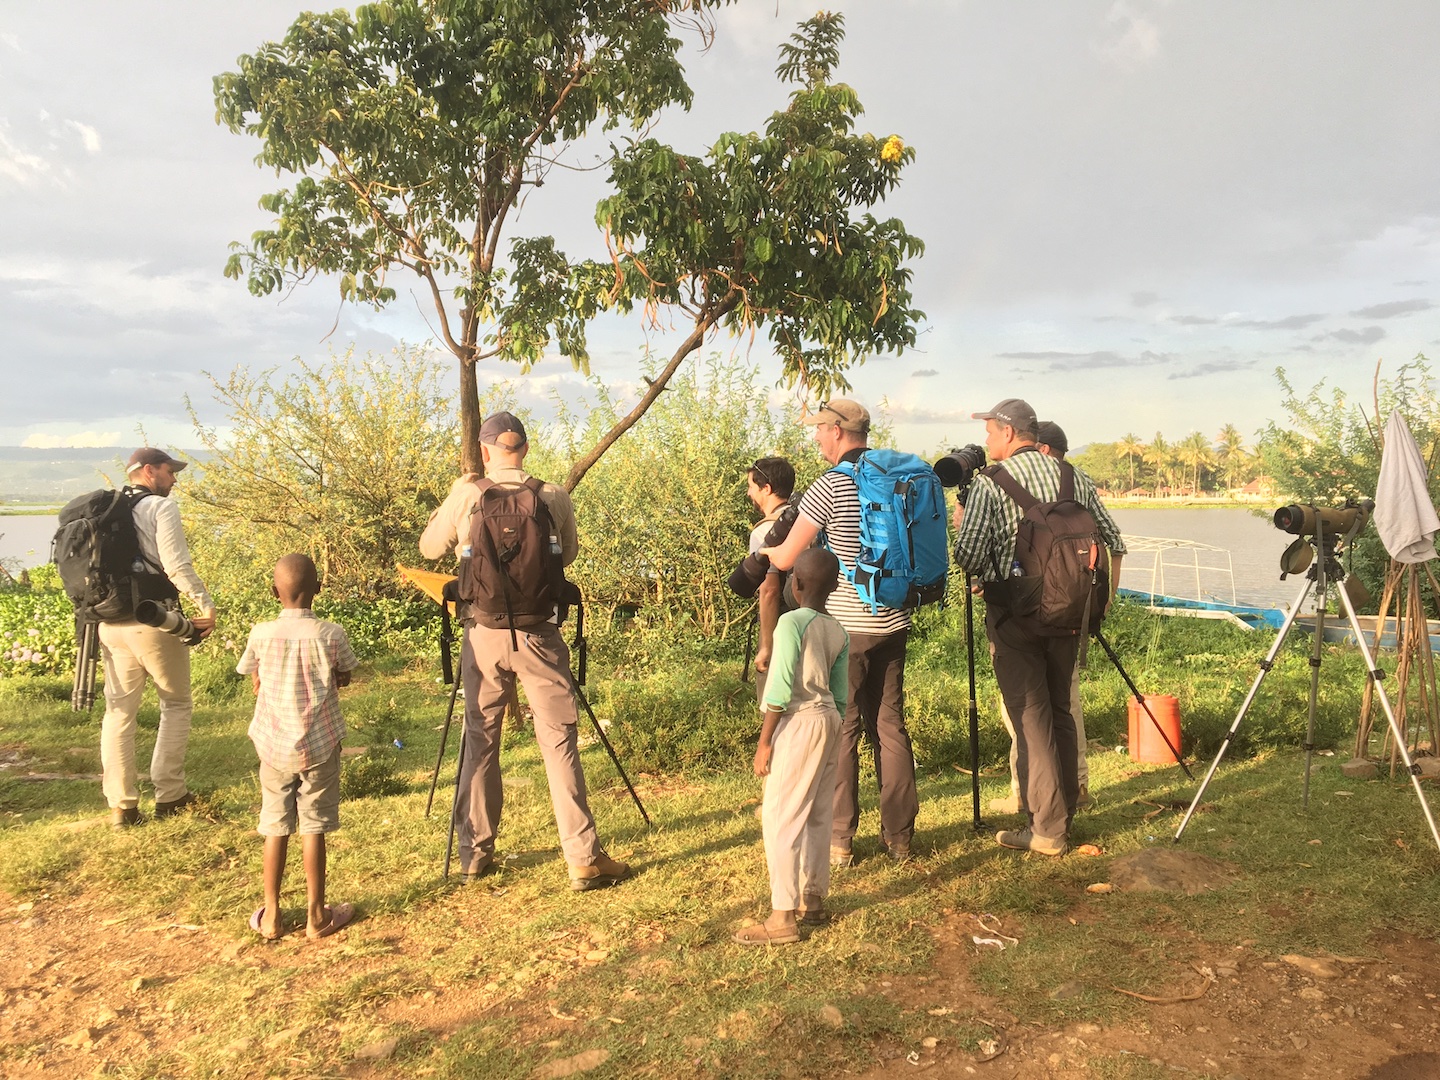 Dutch birders at the shores of Lake Victoria in November 2019